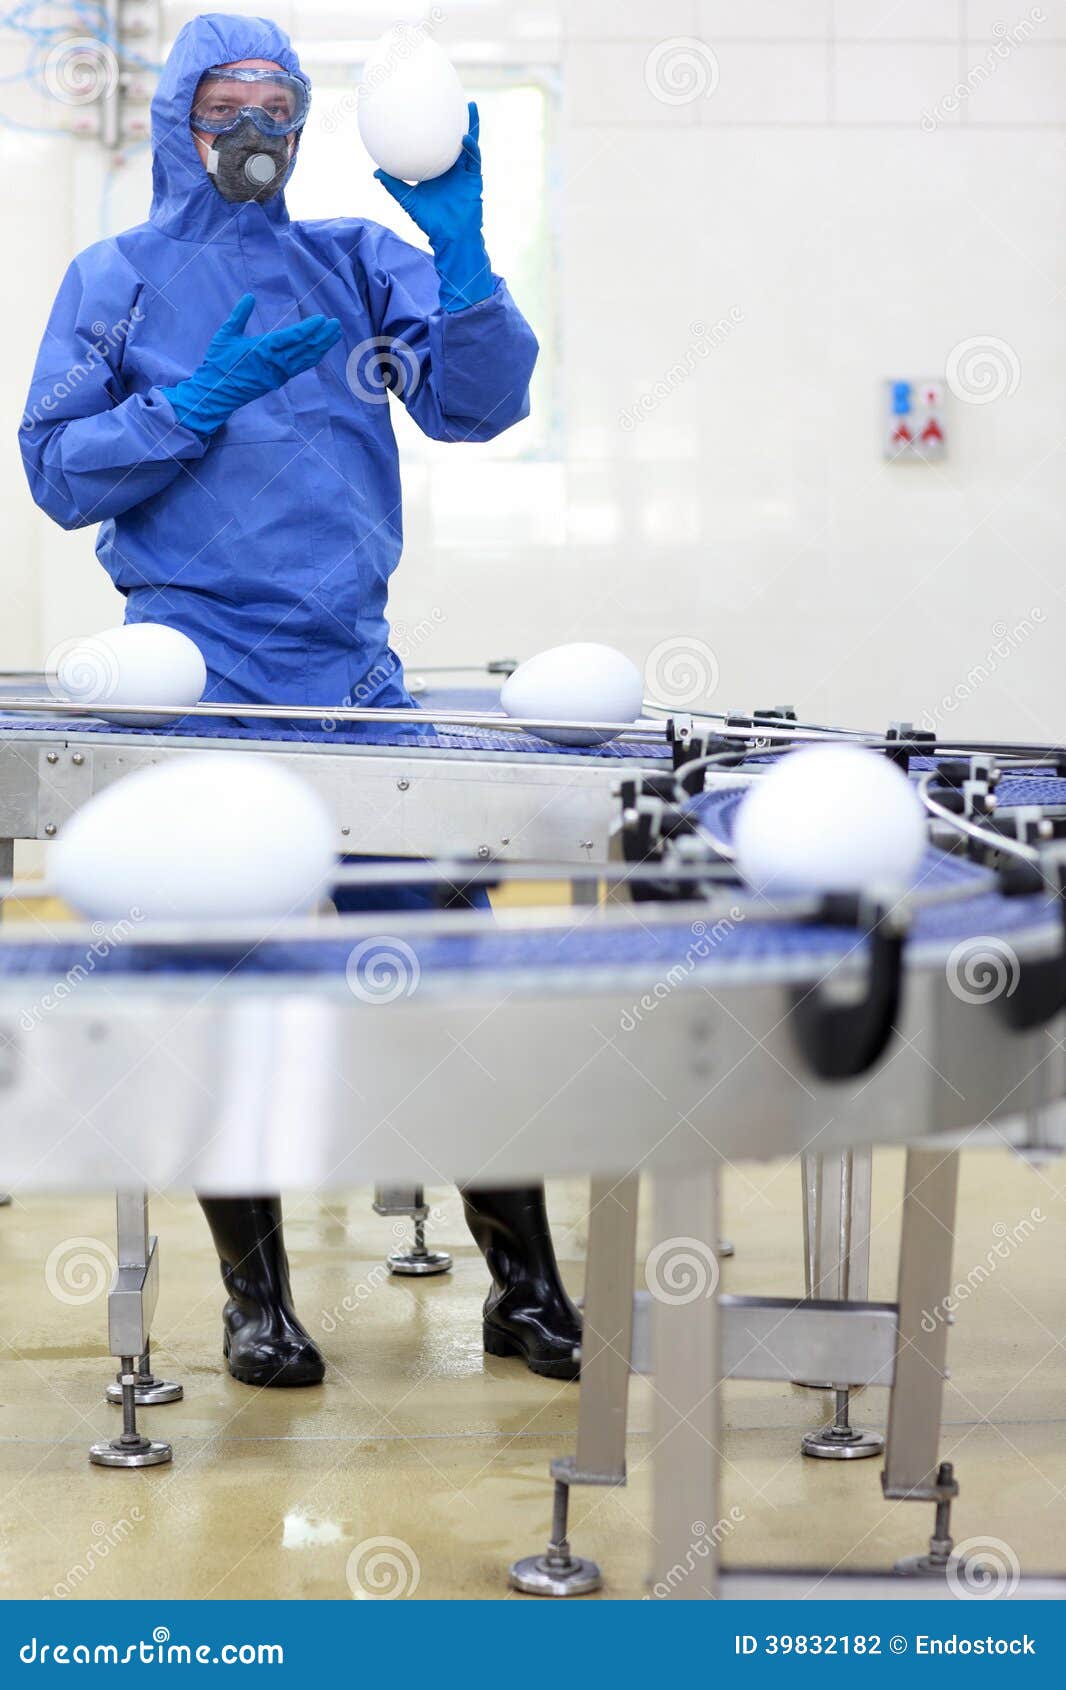 gm0 - engineer showing xxl size eggs at production line